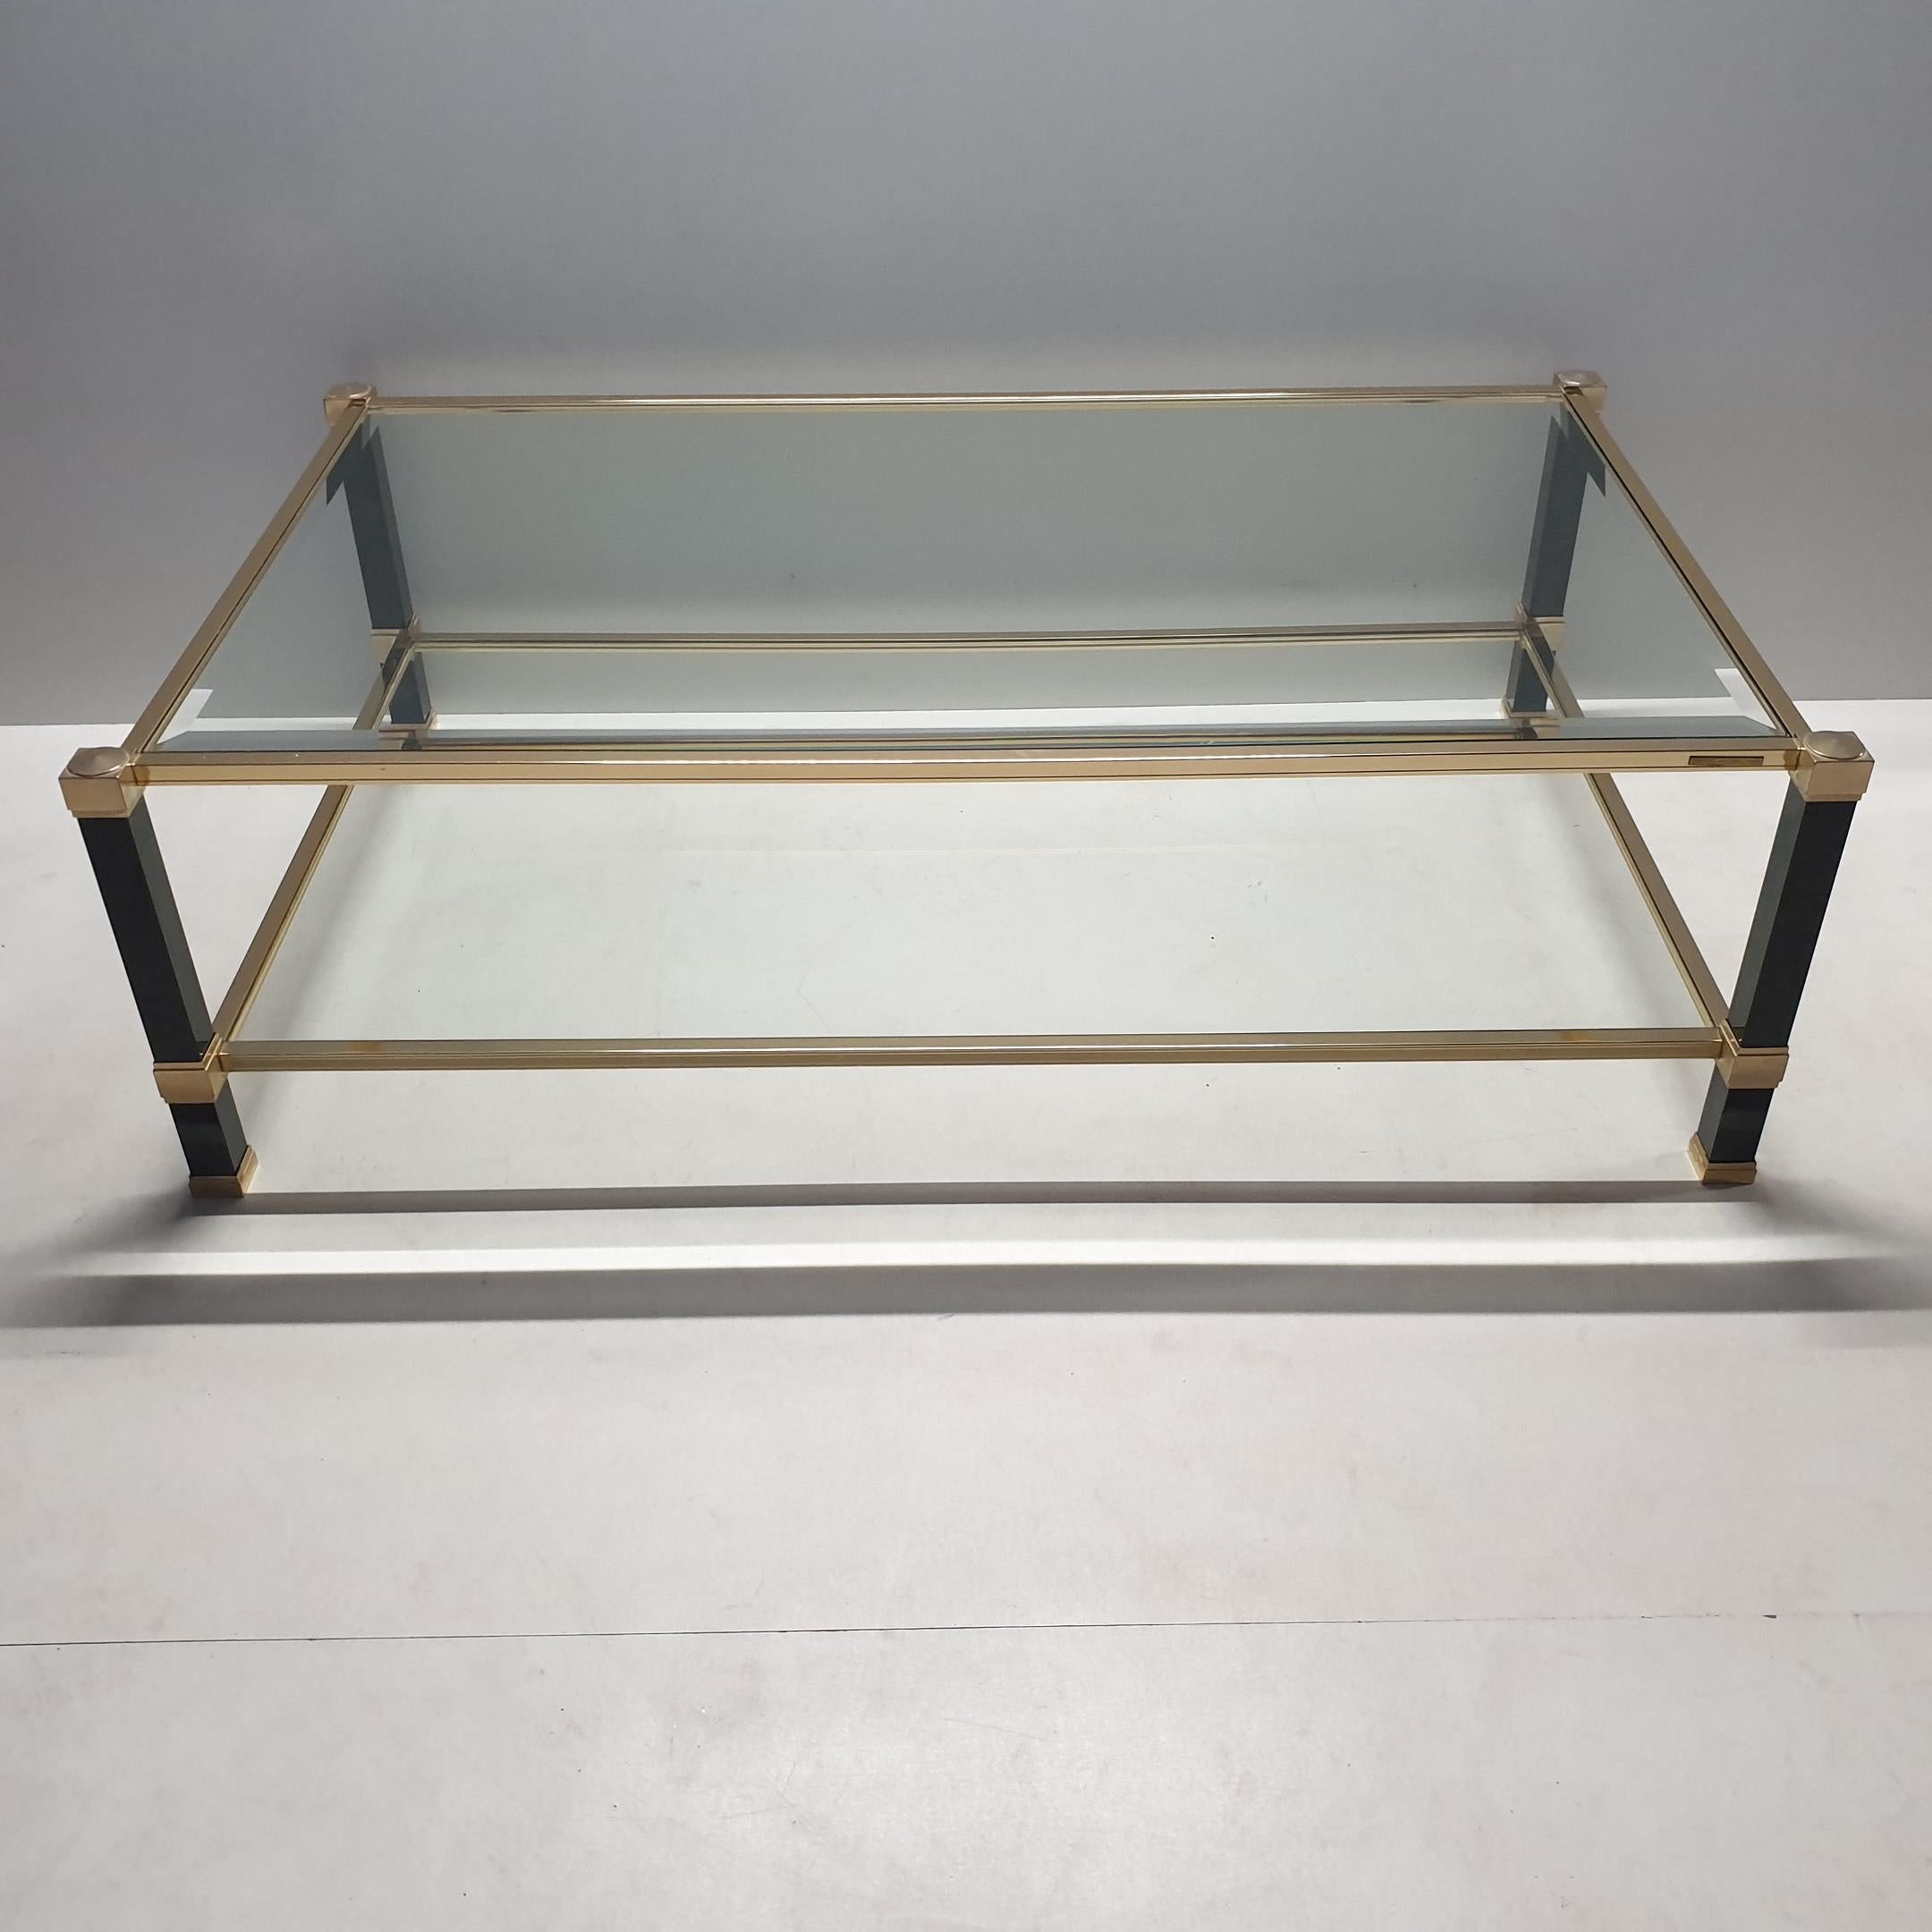 Vintage 2-tiers brass coffee table by Pierre Vandel, 1980s
With a two tone brass frame and faceted glass.